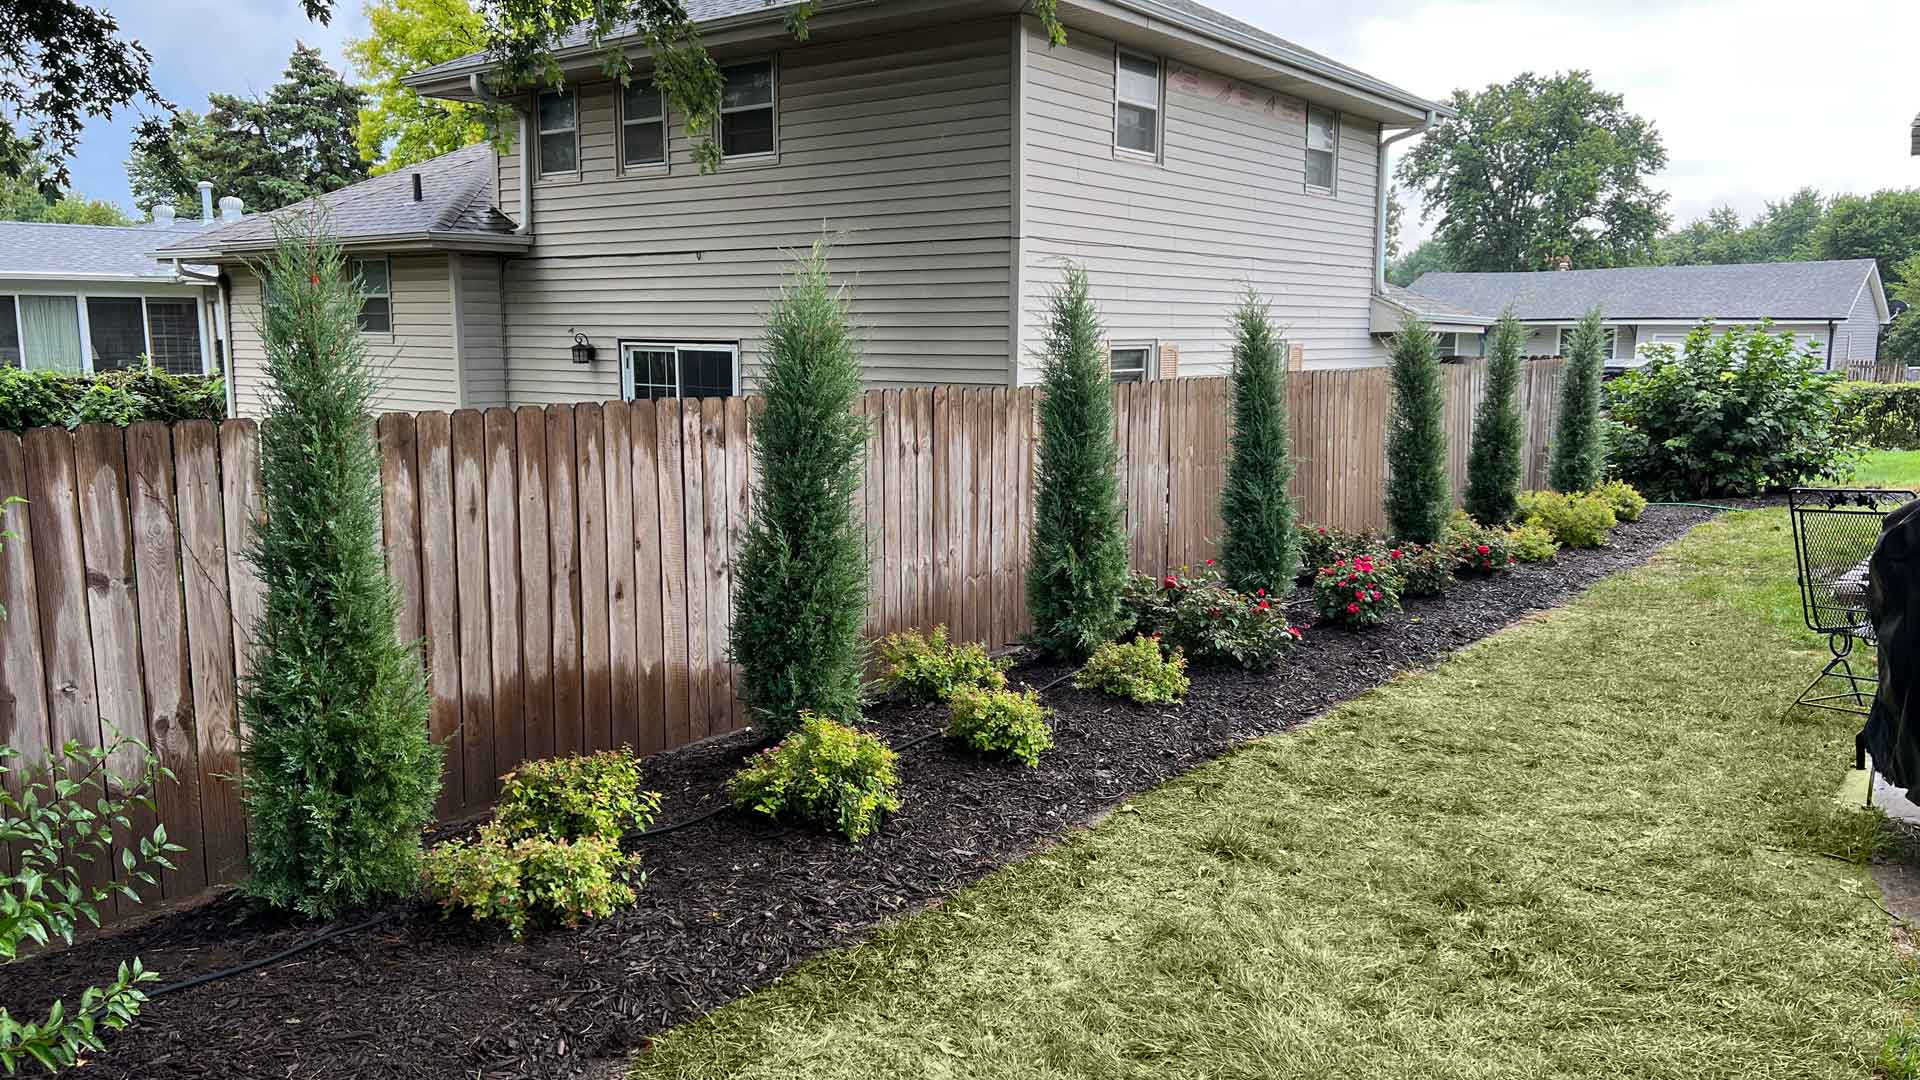 Landscaping services by Clear Creek Landscapes in Omaha, NE.